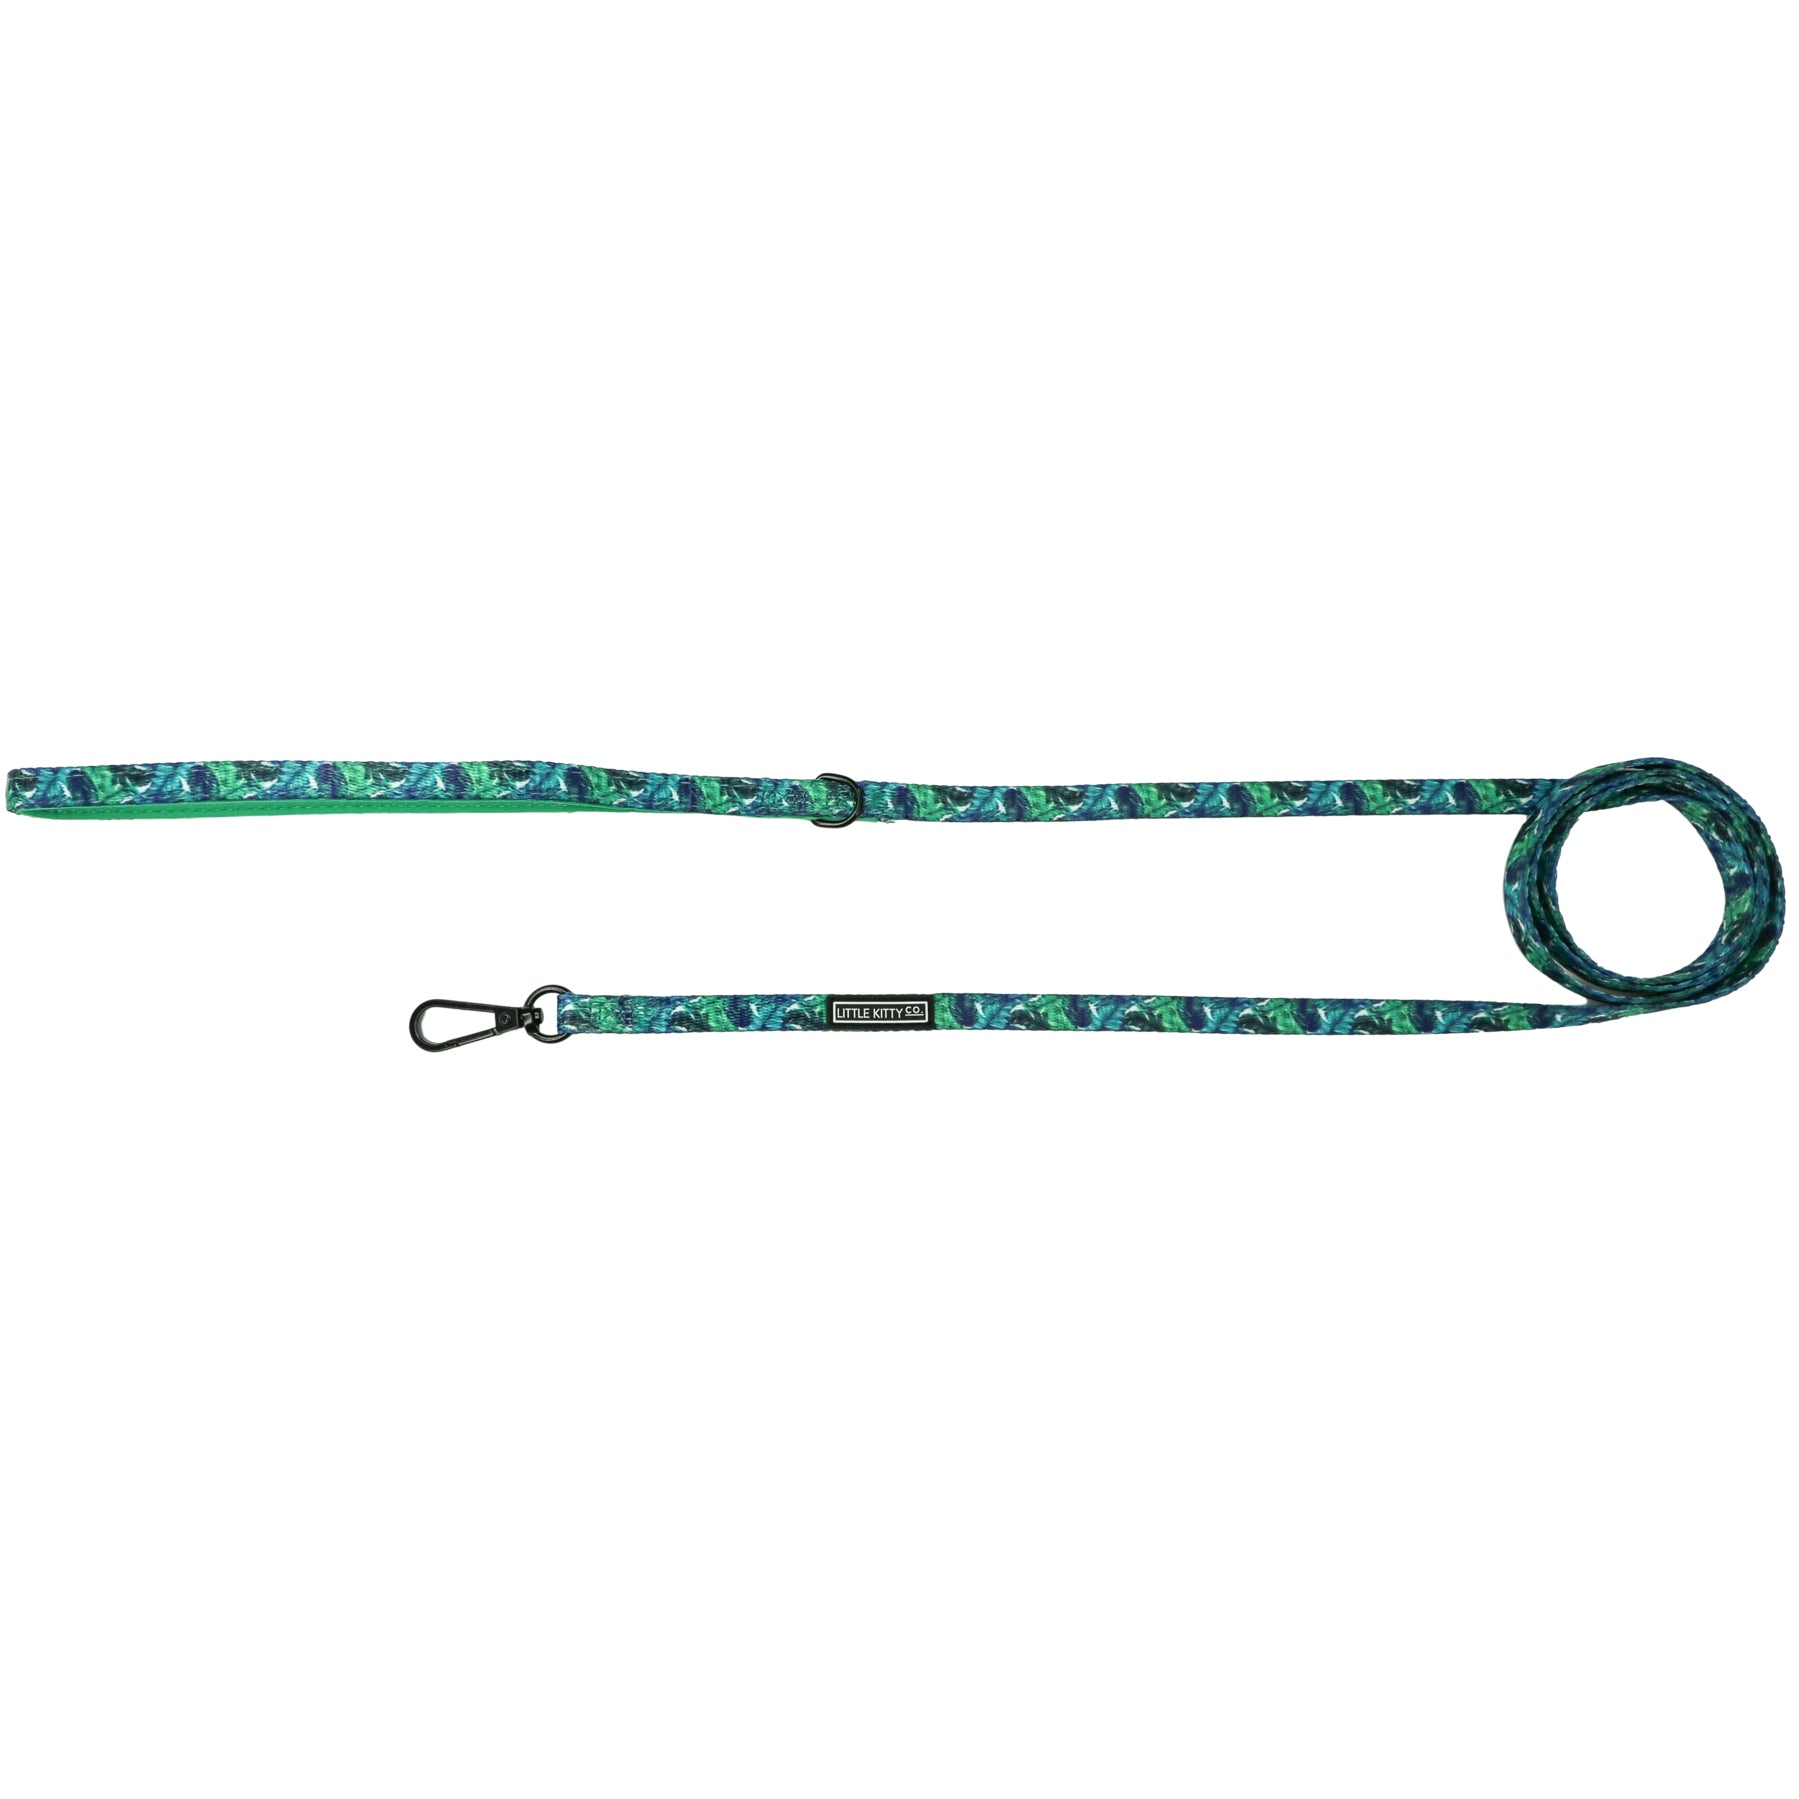 Little Kitty Co. Cat Step-In Harness - Vacay Palms (Limited Edition) - A vibrant green cat leash with a leaf motif.